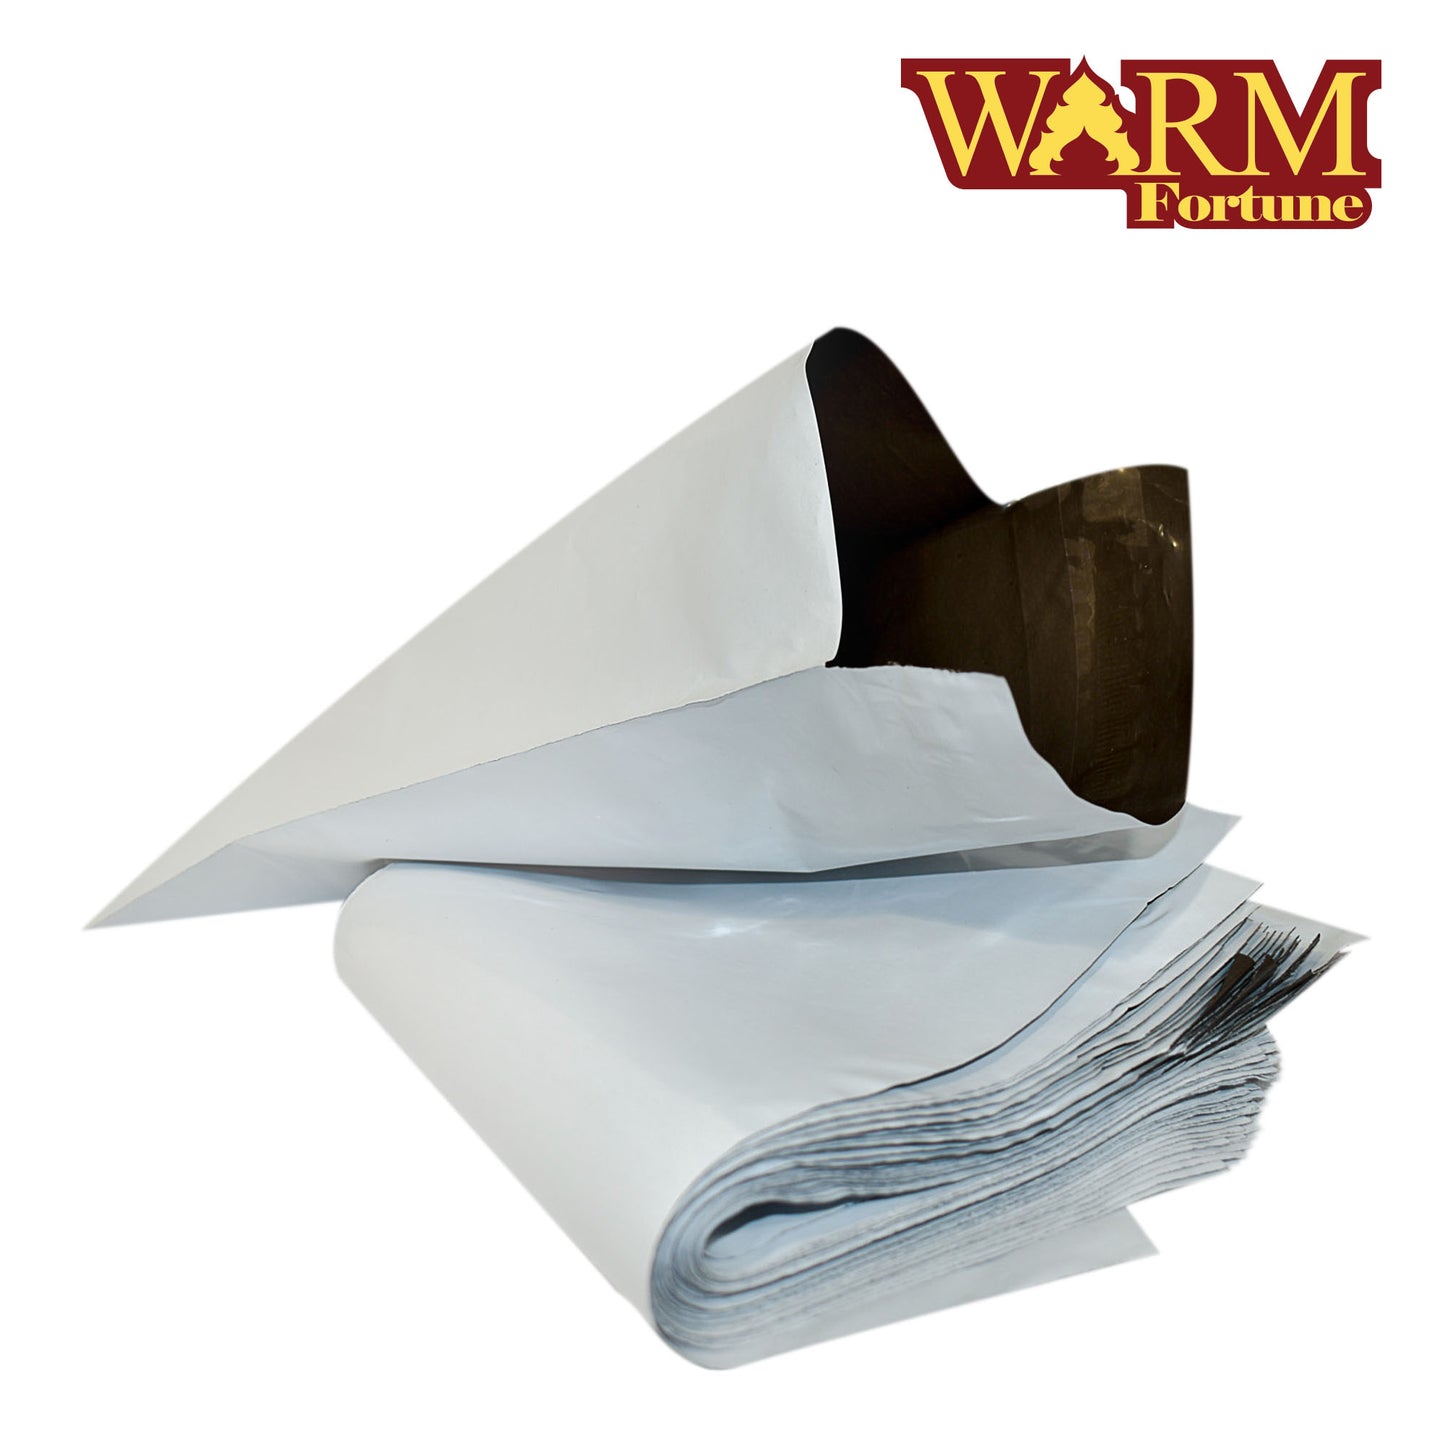 1 Pack 10"x13" Poly Mailer, Sets of 100 (White/Gray) - Self Sealing Mailing Bag Strong & Opaque